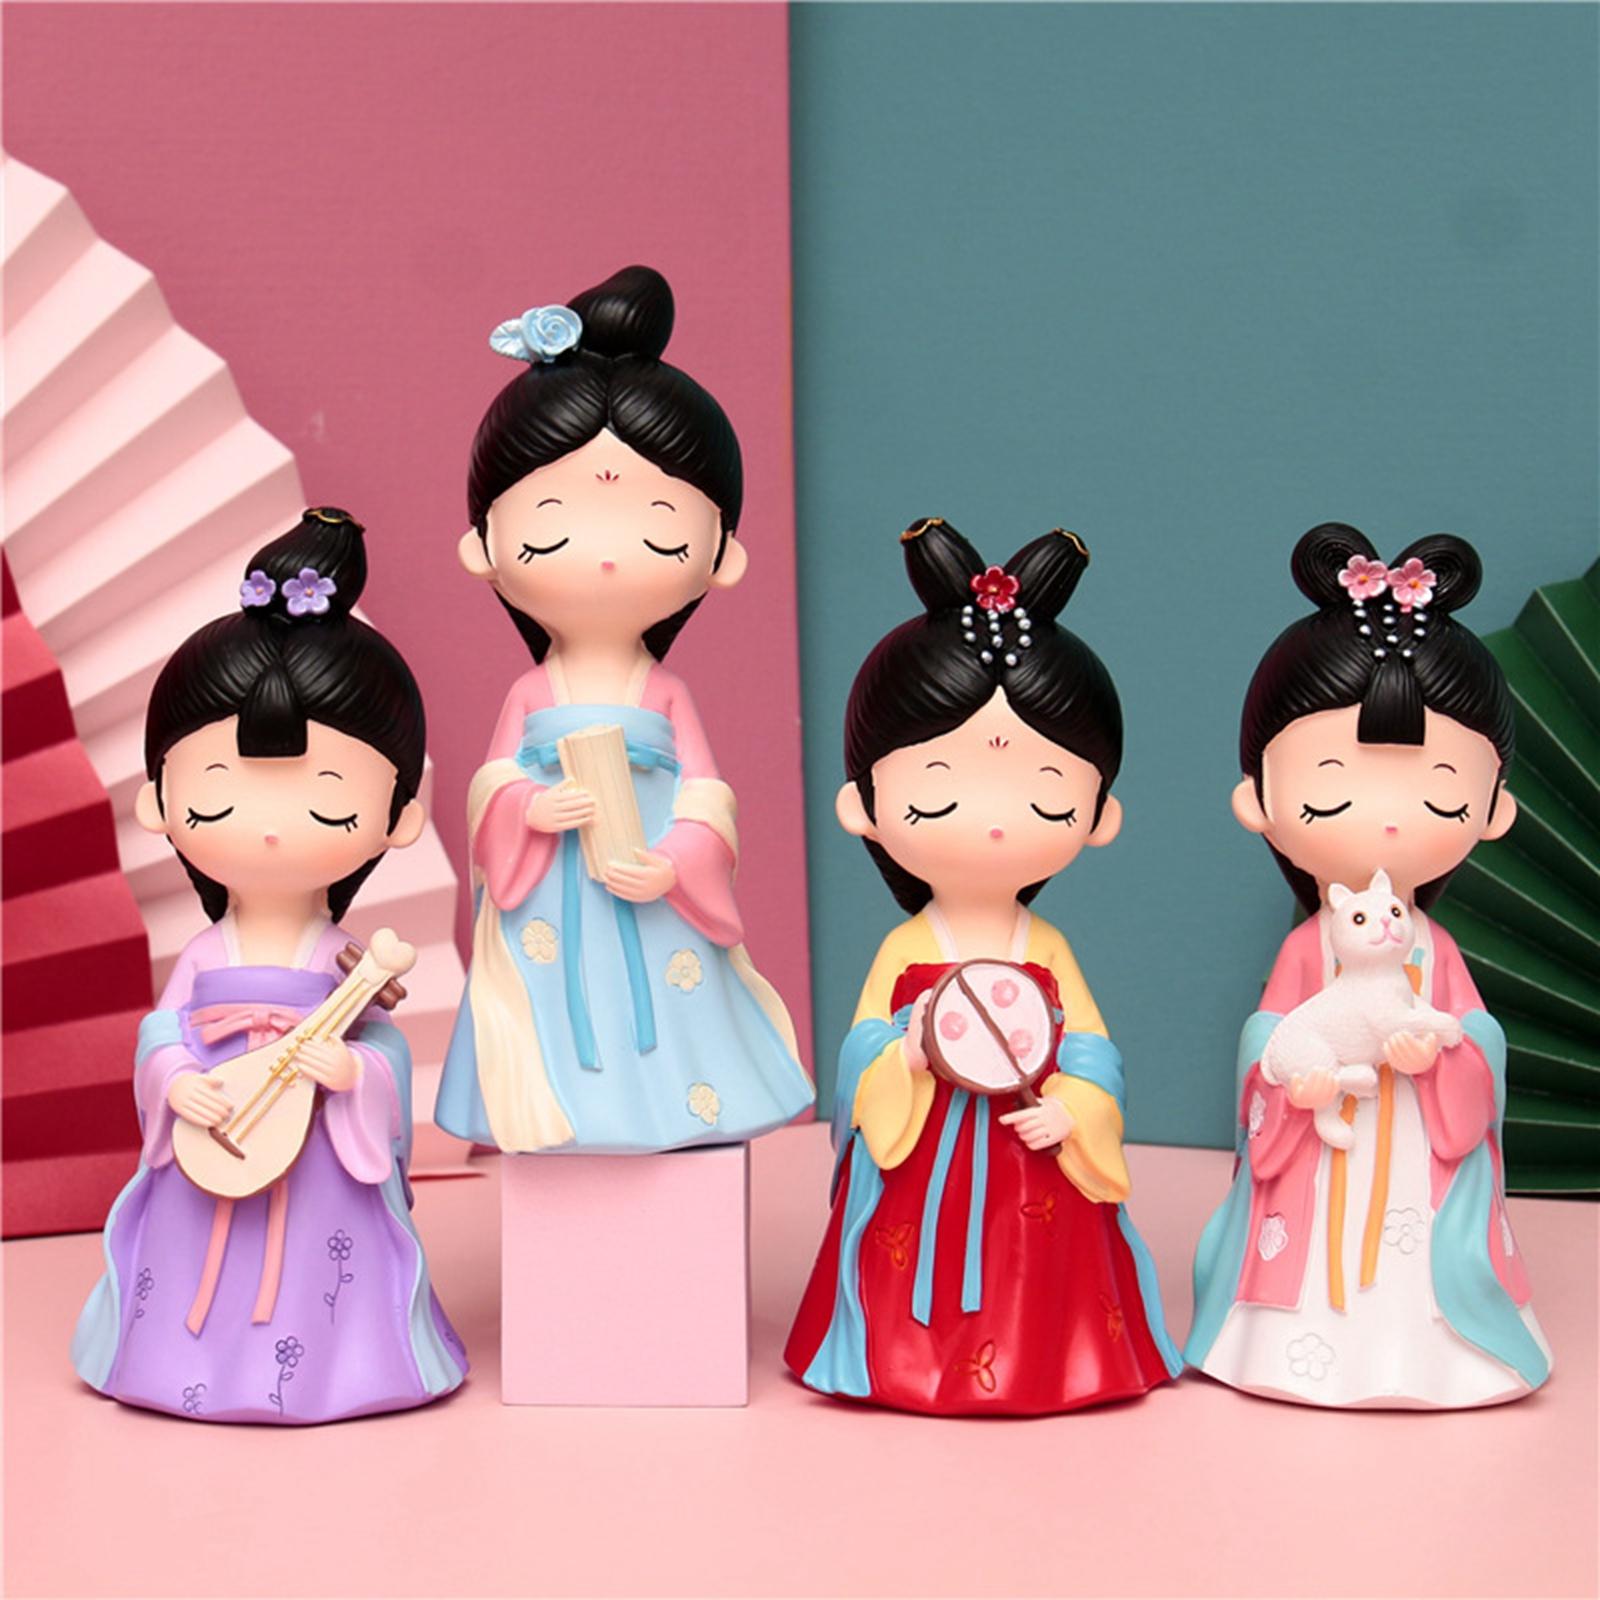 Ancient Chinese Girl Dolls Collectible Figurines Handicraft Girls Gift With Book